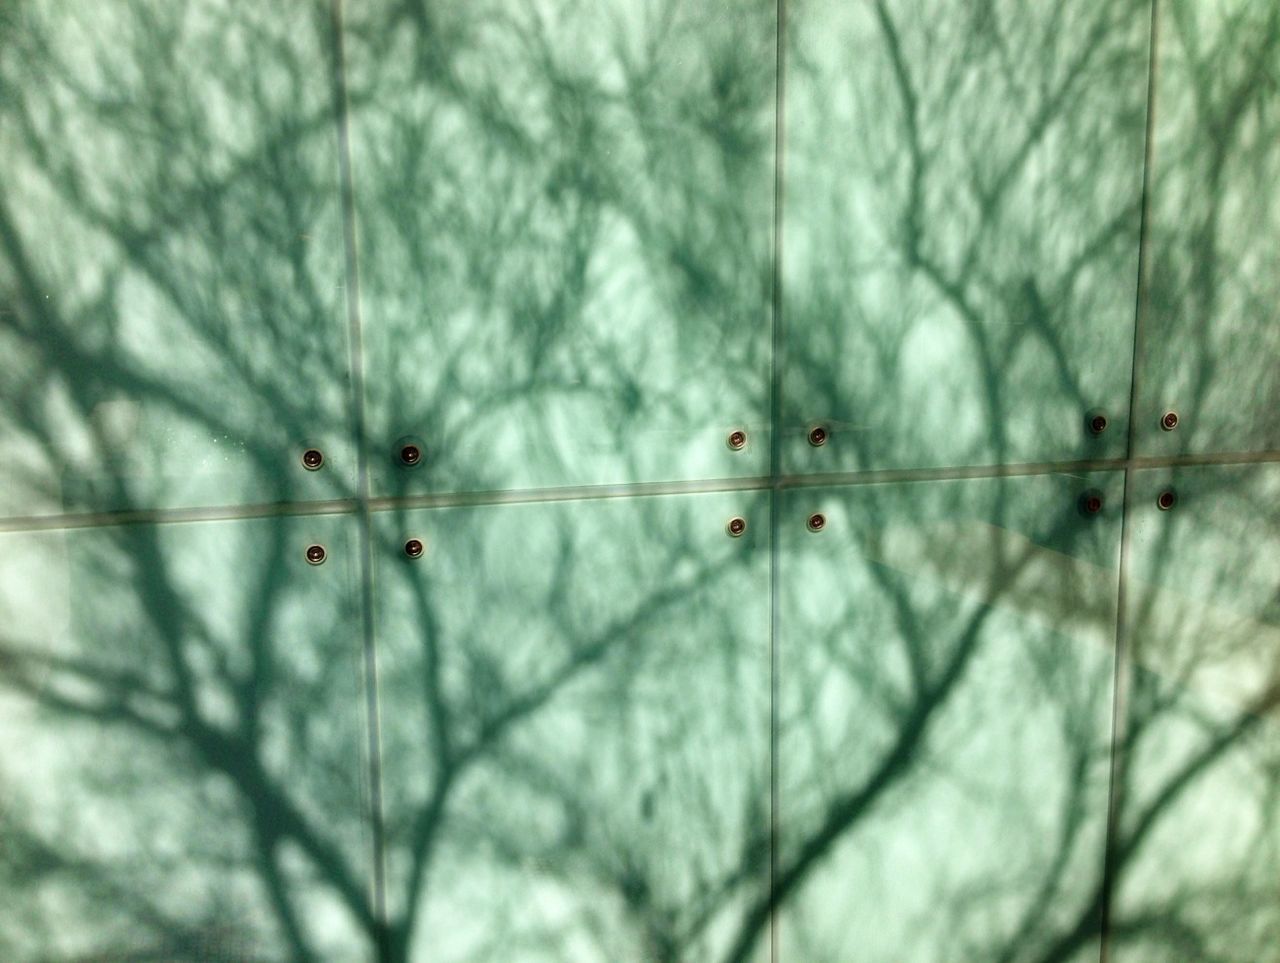 Shadows of bare trees on wall